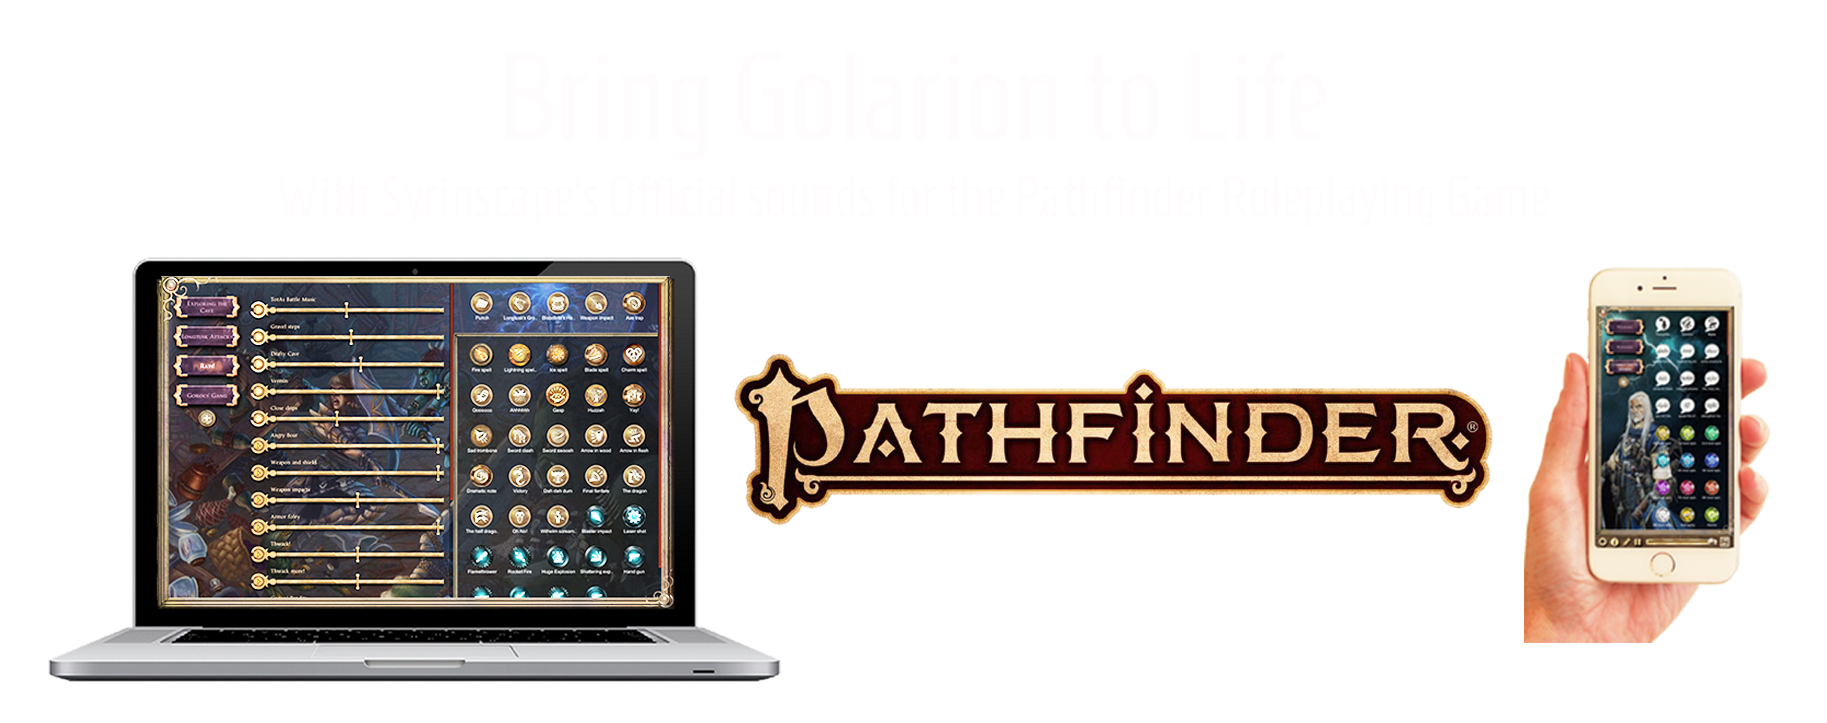 Bring Golarion to life with the official sounds of the Pathfinder RPG